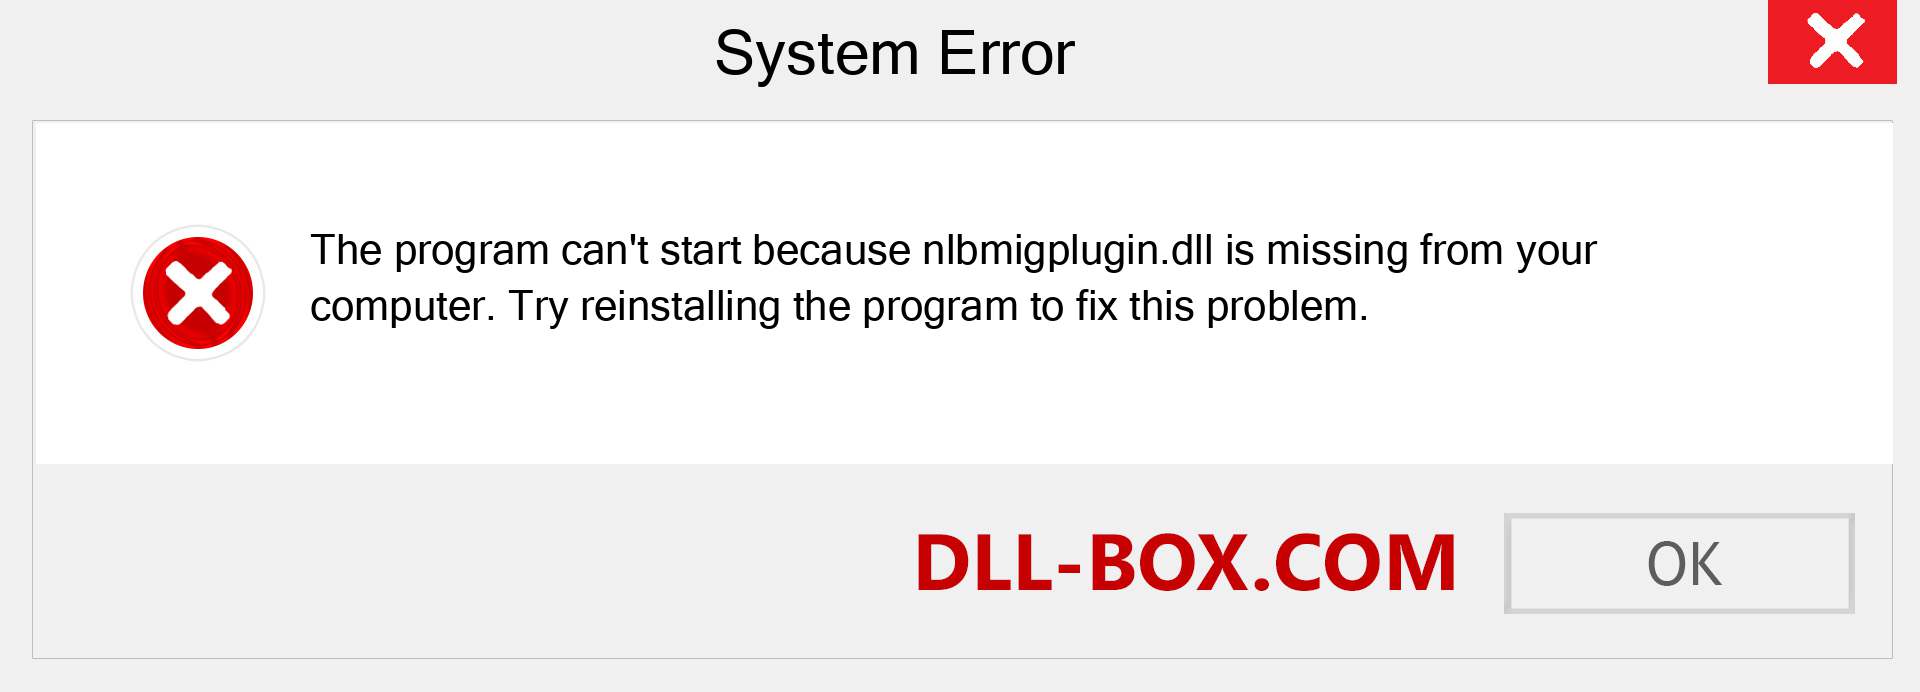  nlbmigplugin.dll file is missing?. Download for Windows 7, 8, 10 - Fix  nlbmigplugin dll Missing Error on Windows, photos, images